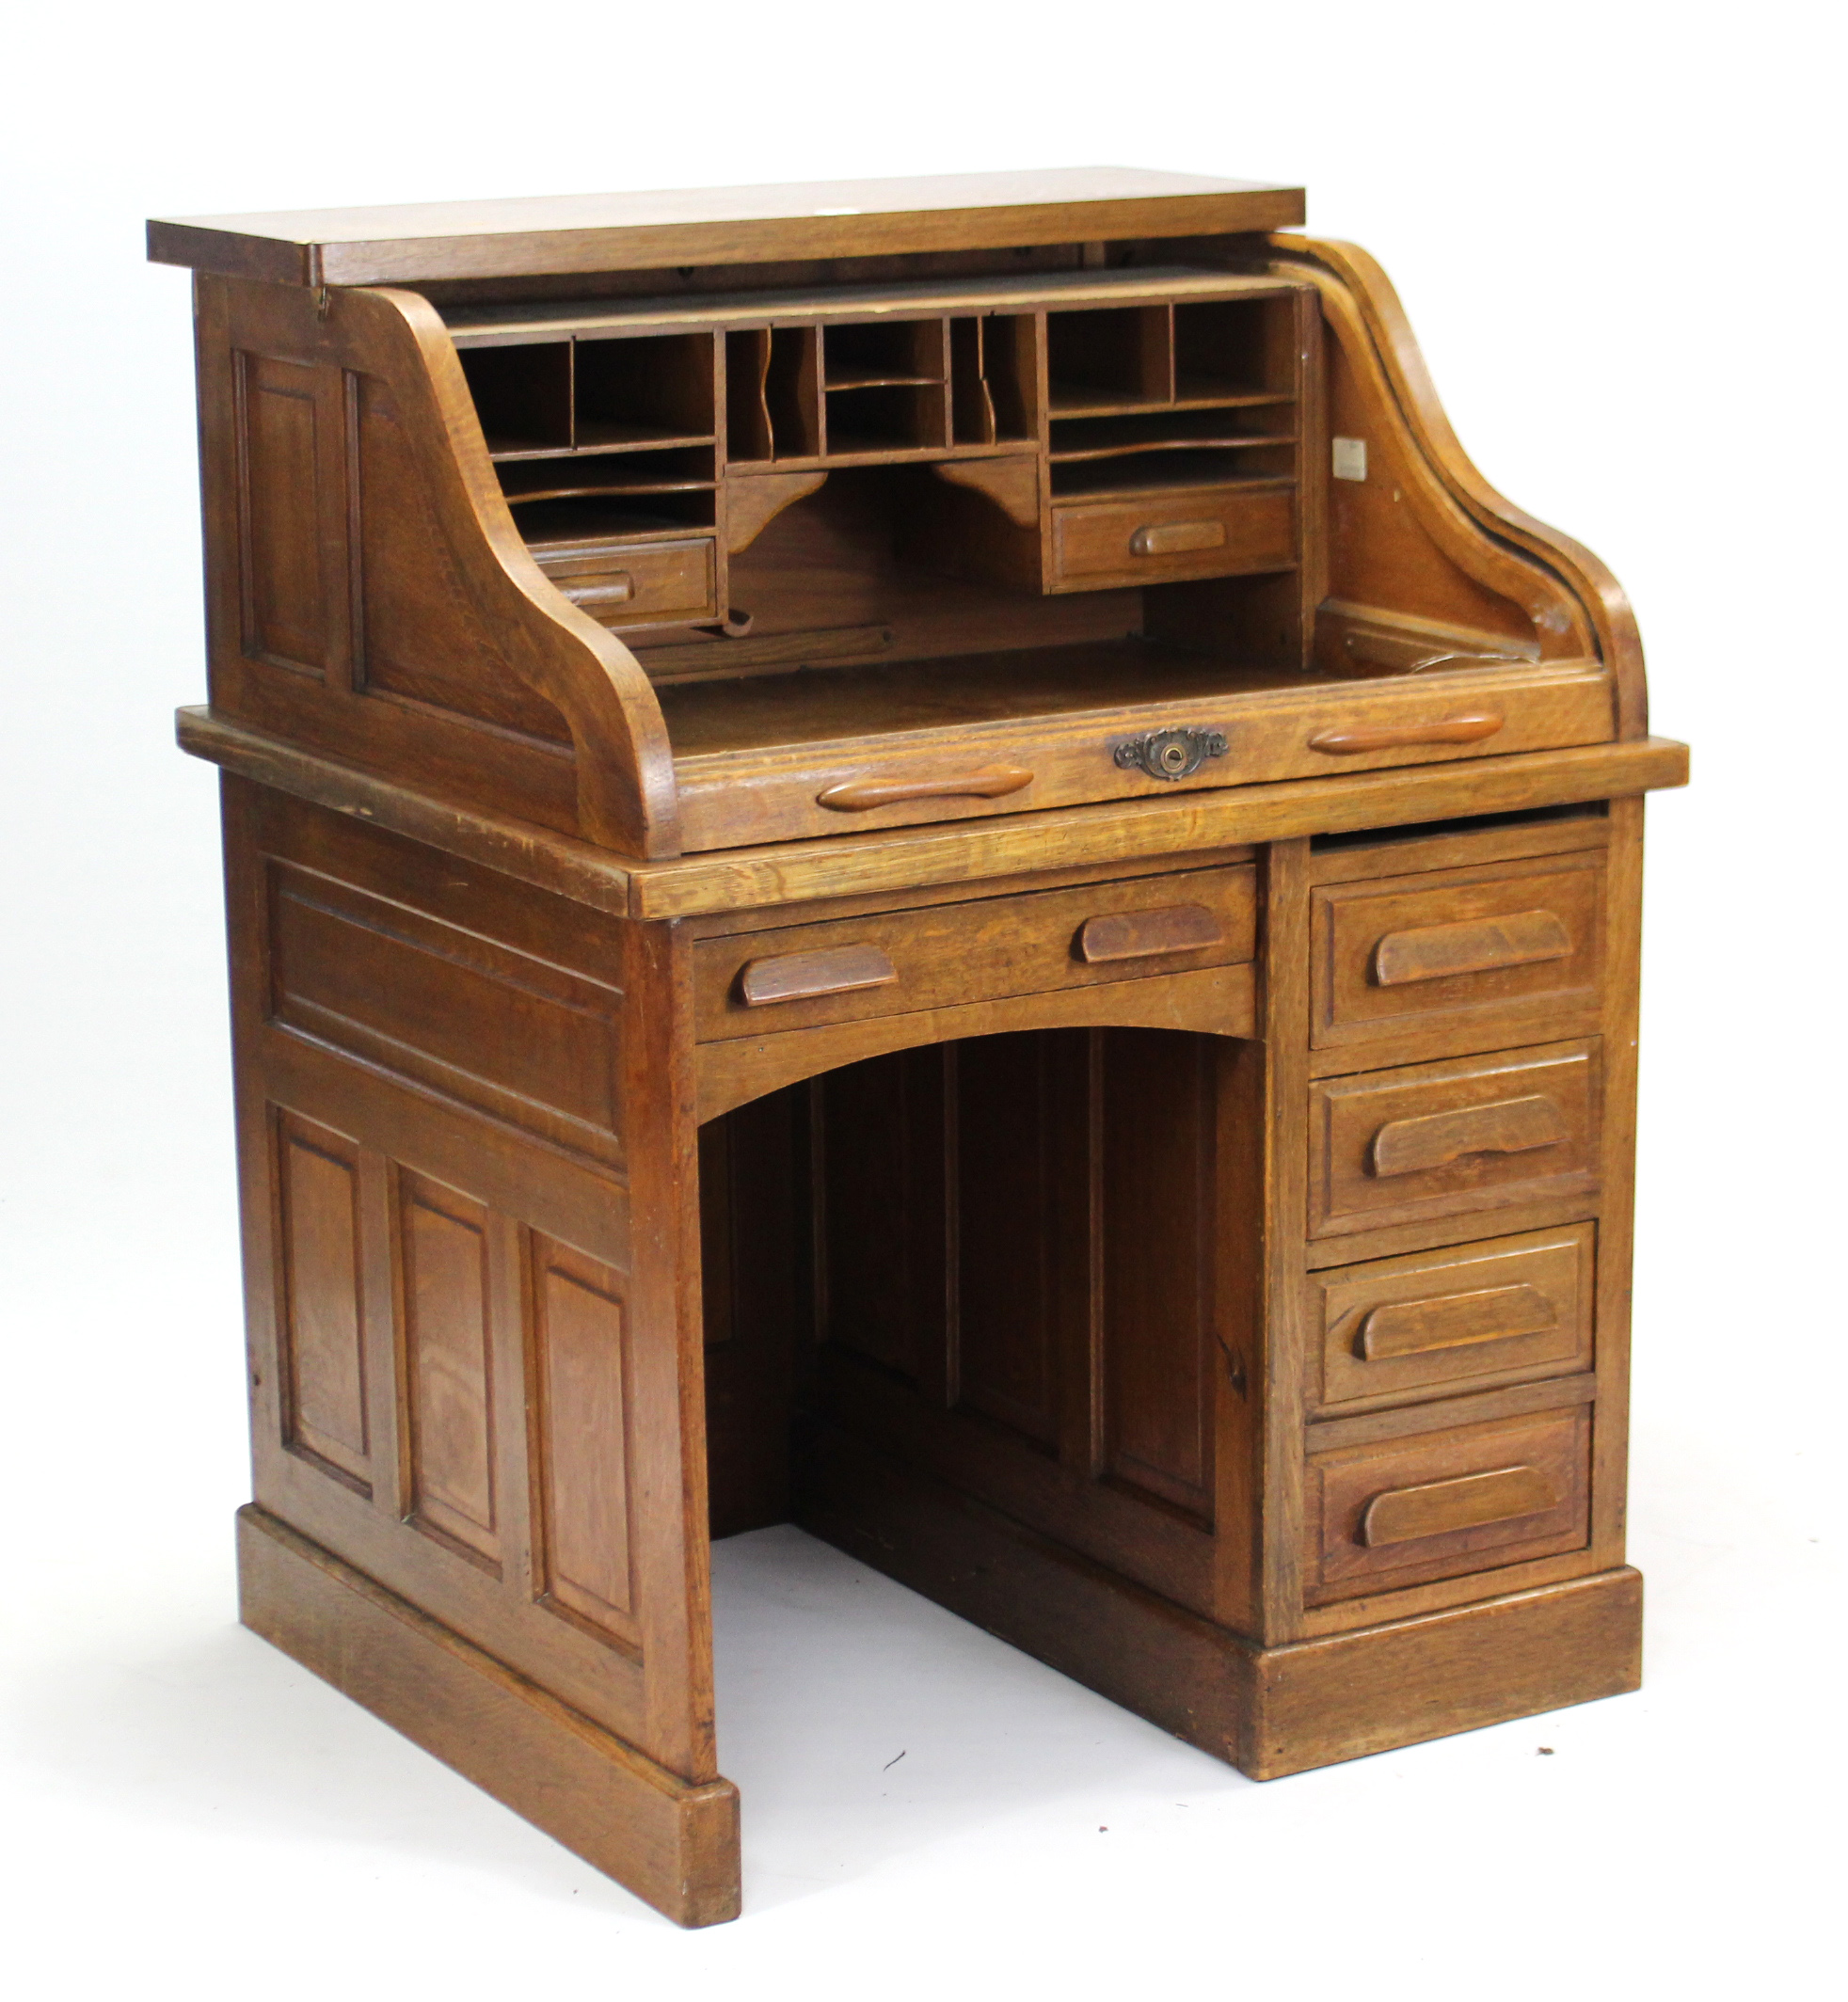 An early 20th century small oak knee-hole roll-top desk with fitted interior, enclosed by tambour